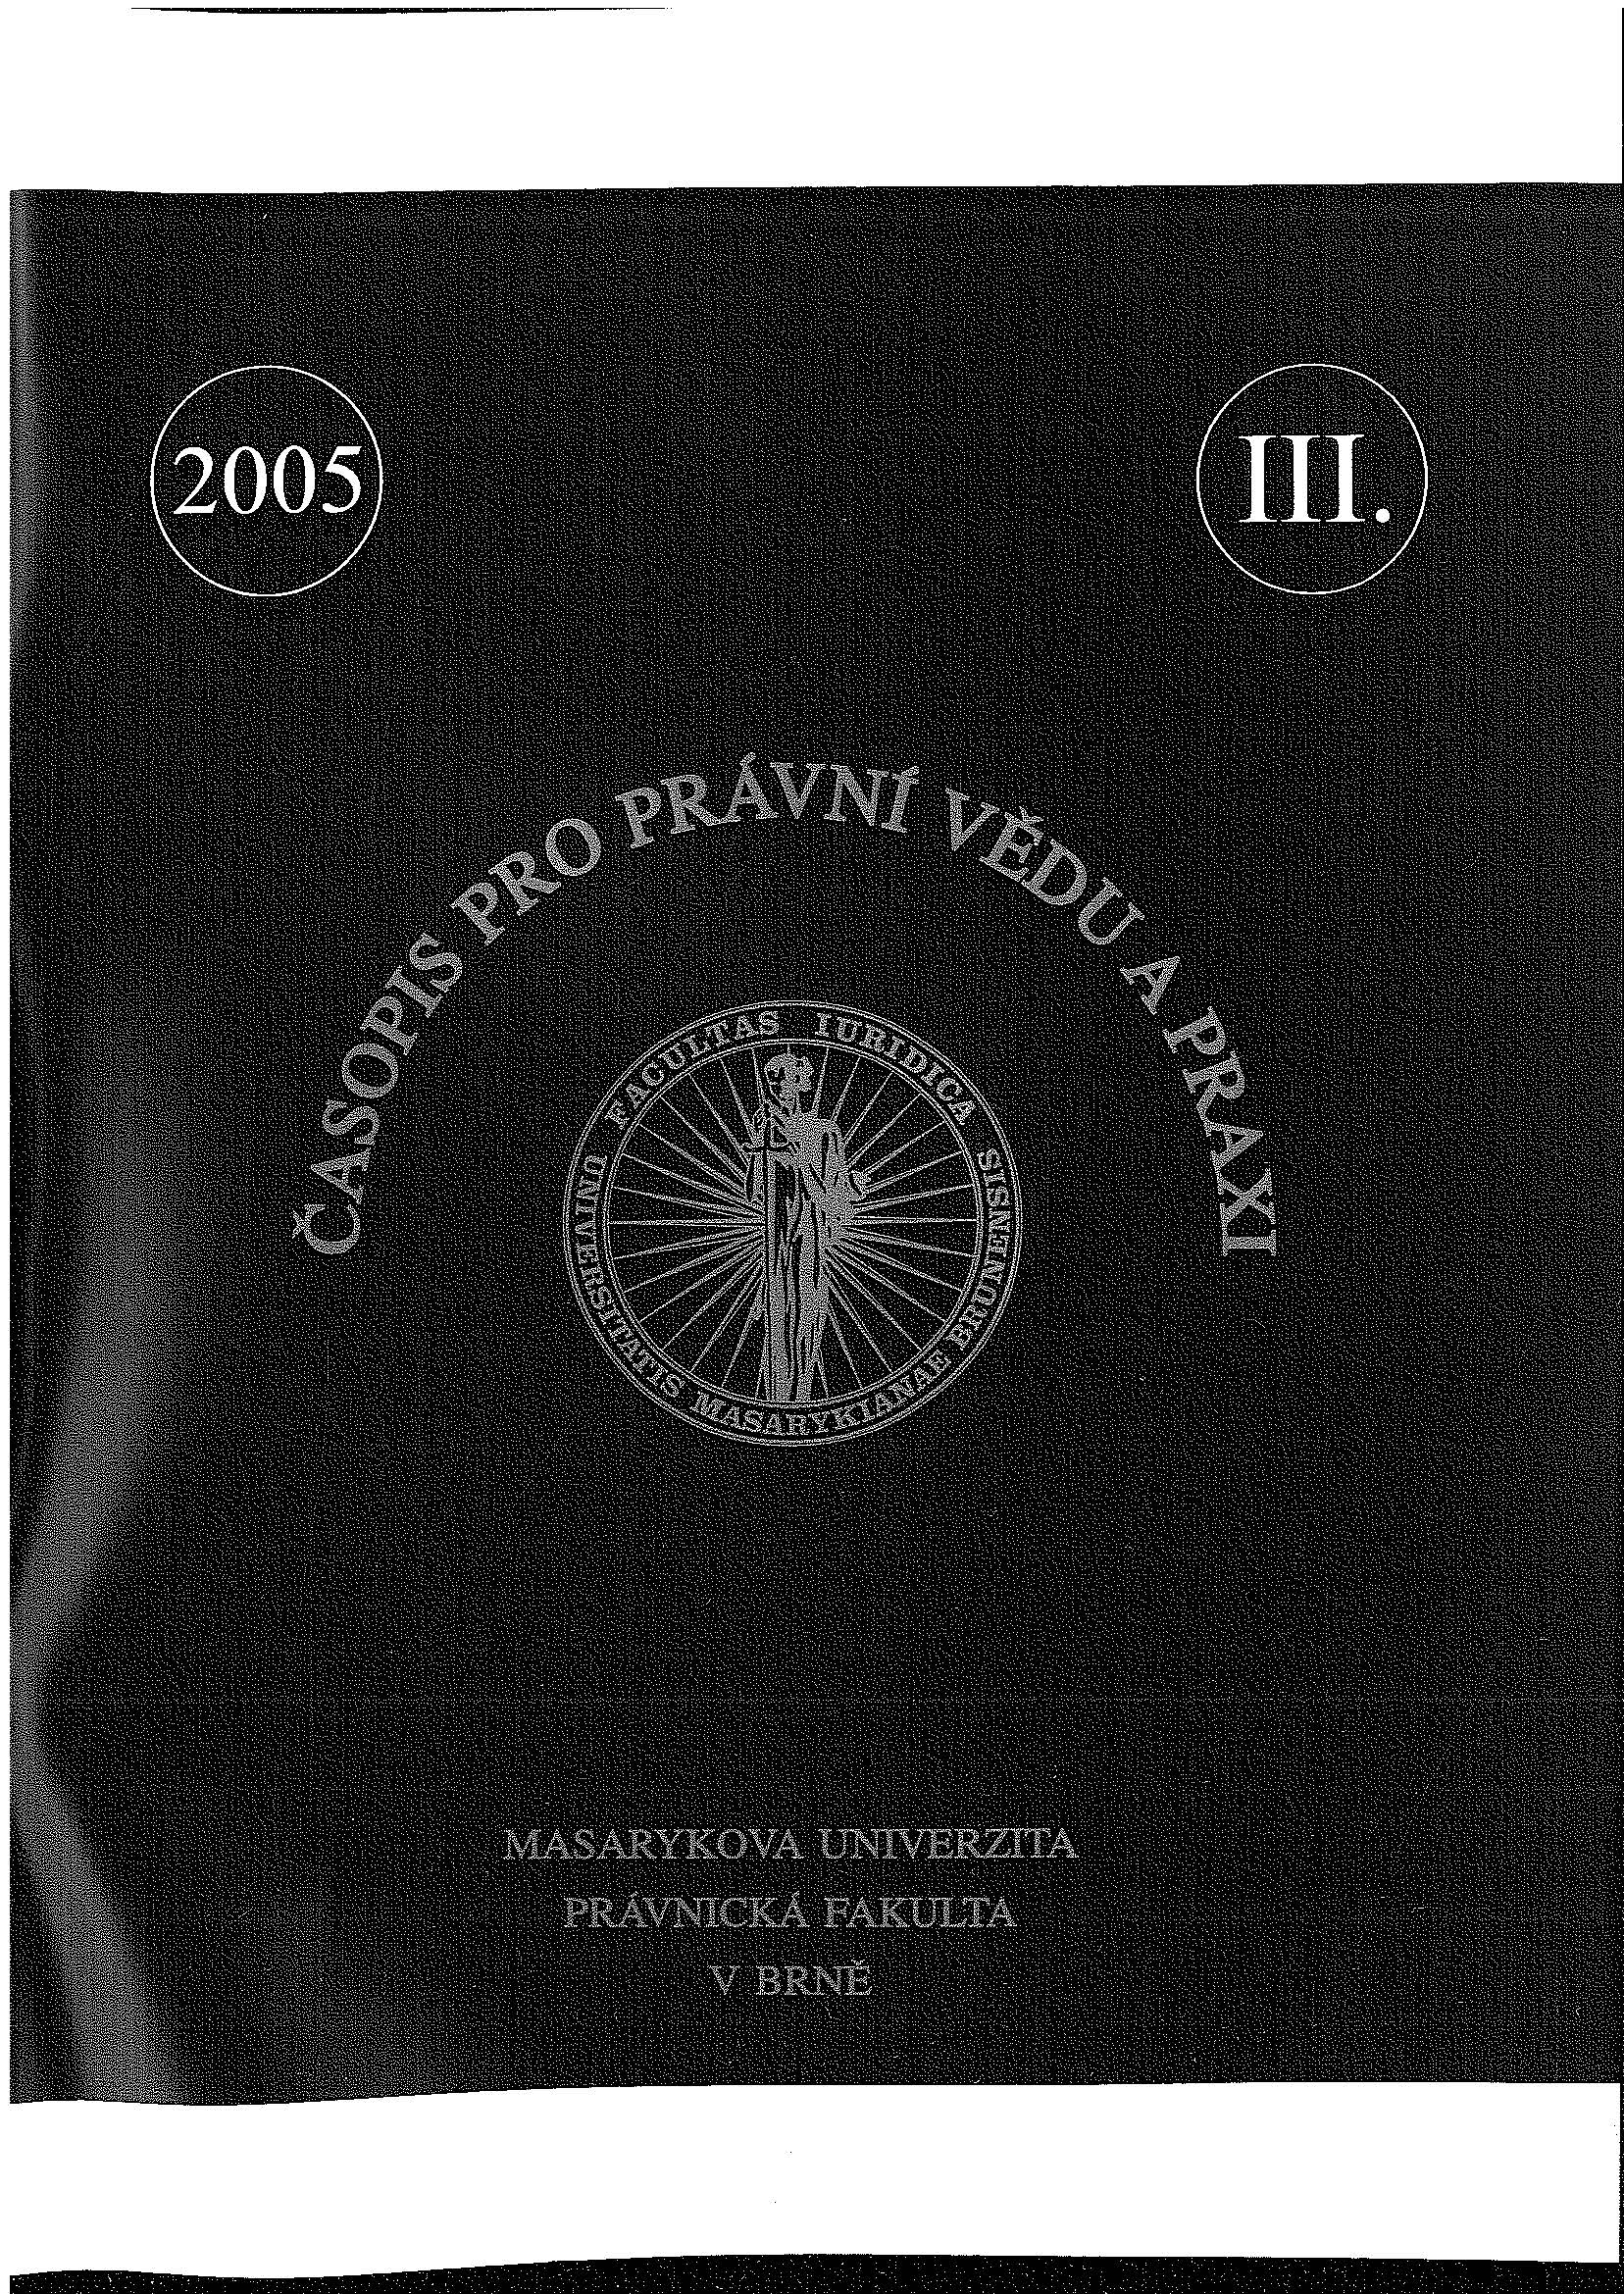 On the last amendment to the law of competition protection performed by law No. 361/2005 Coll. Cover Image